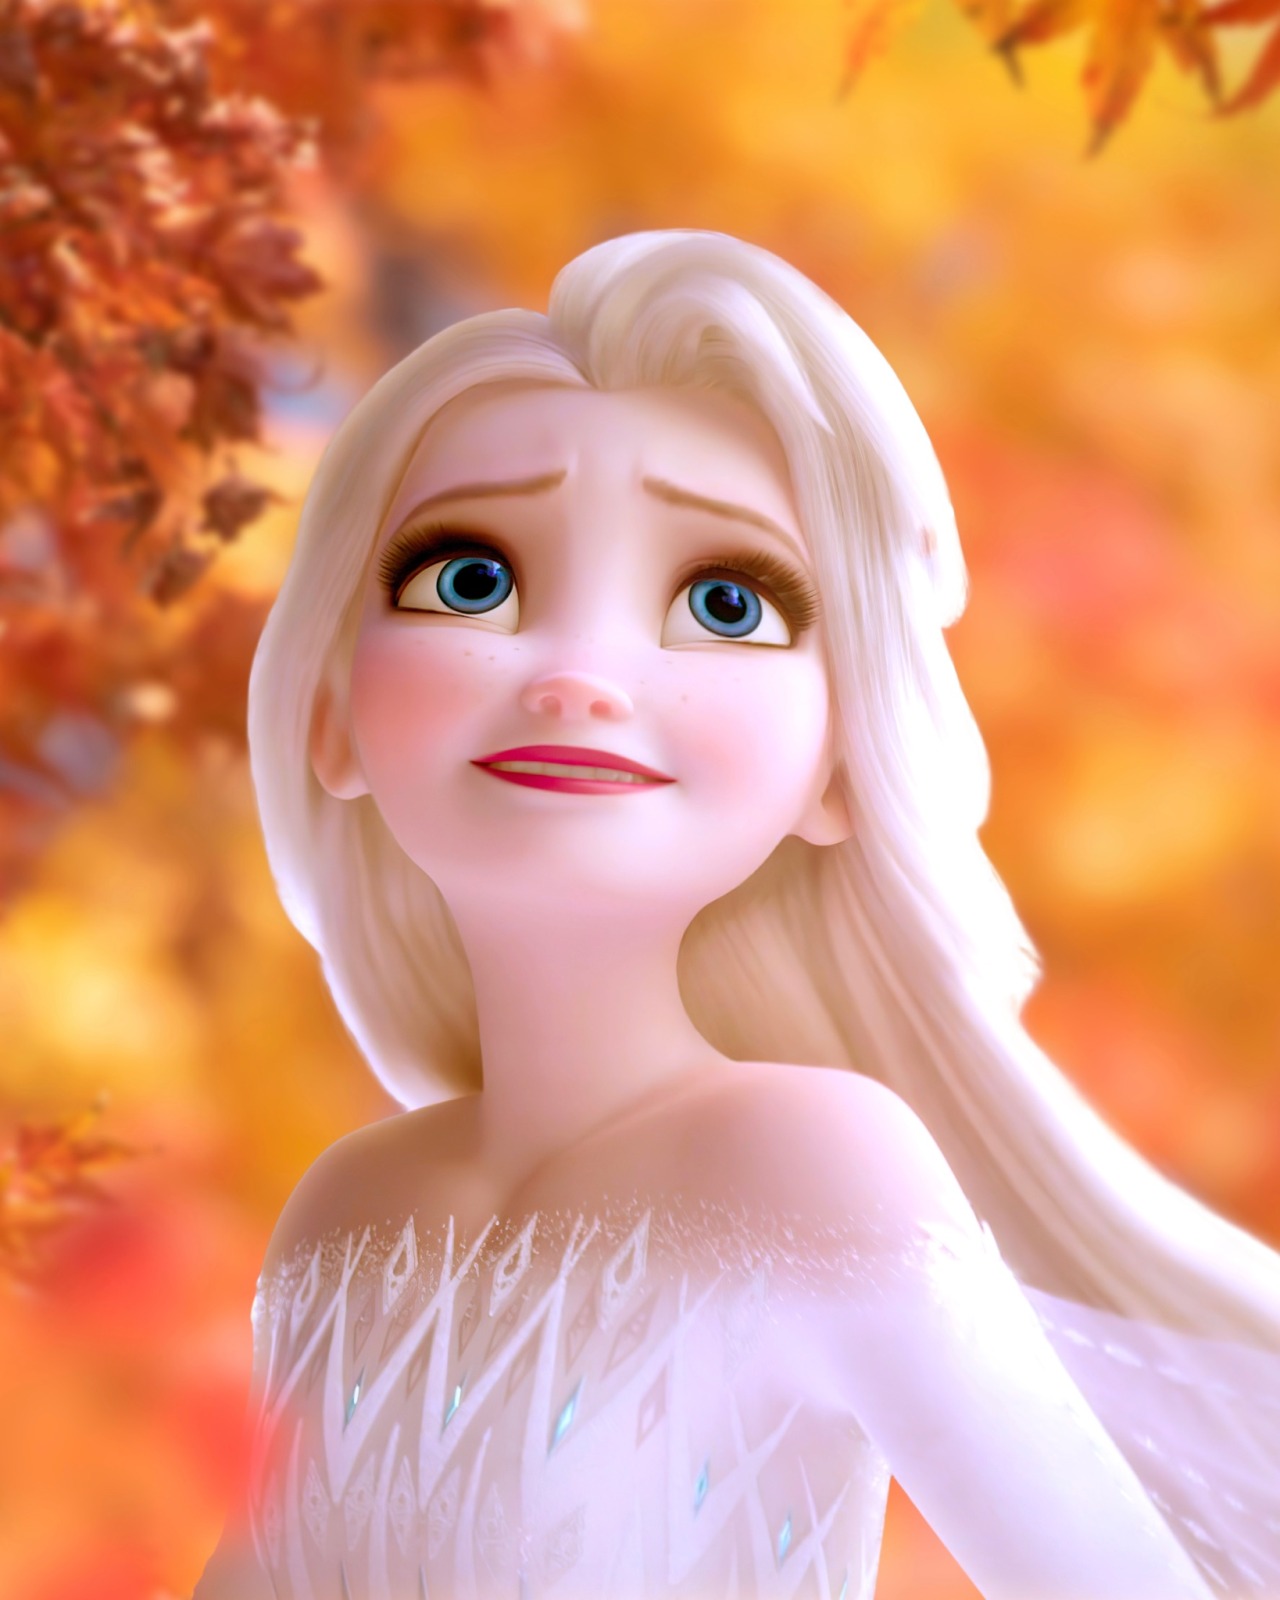 Frozen 2 fall wallpapers with autumn leaves 